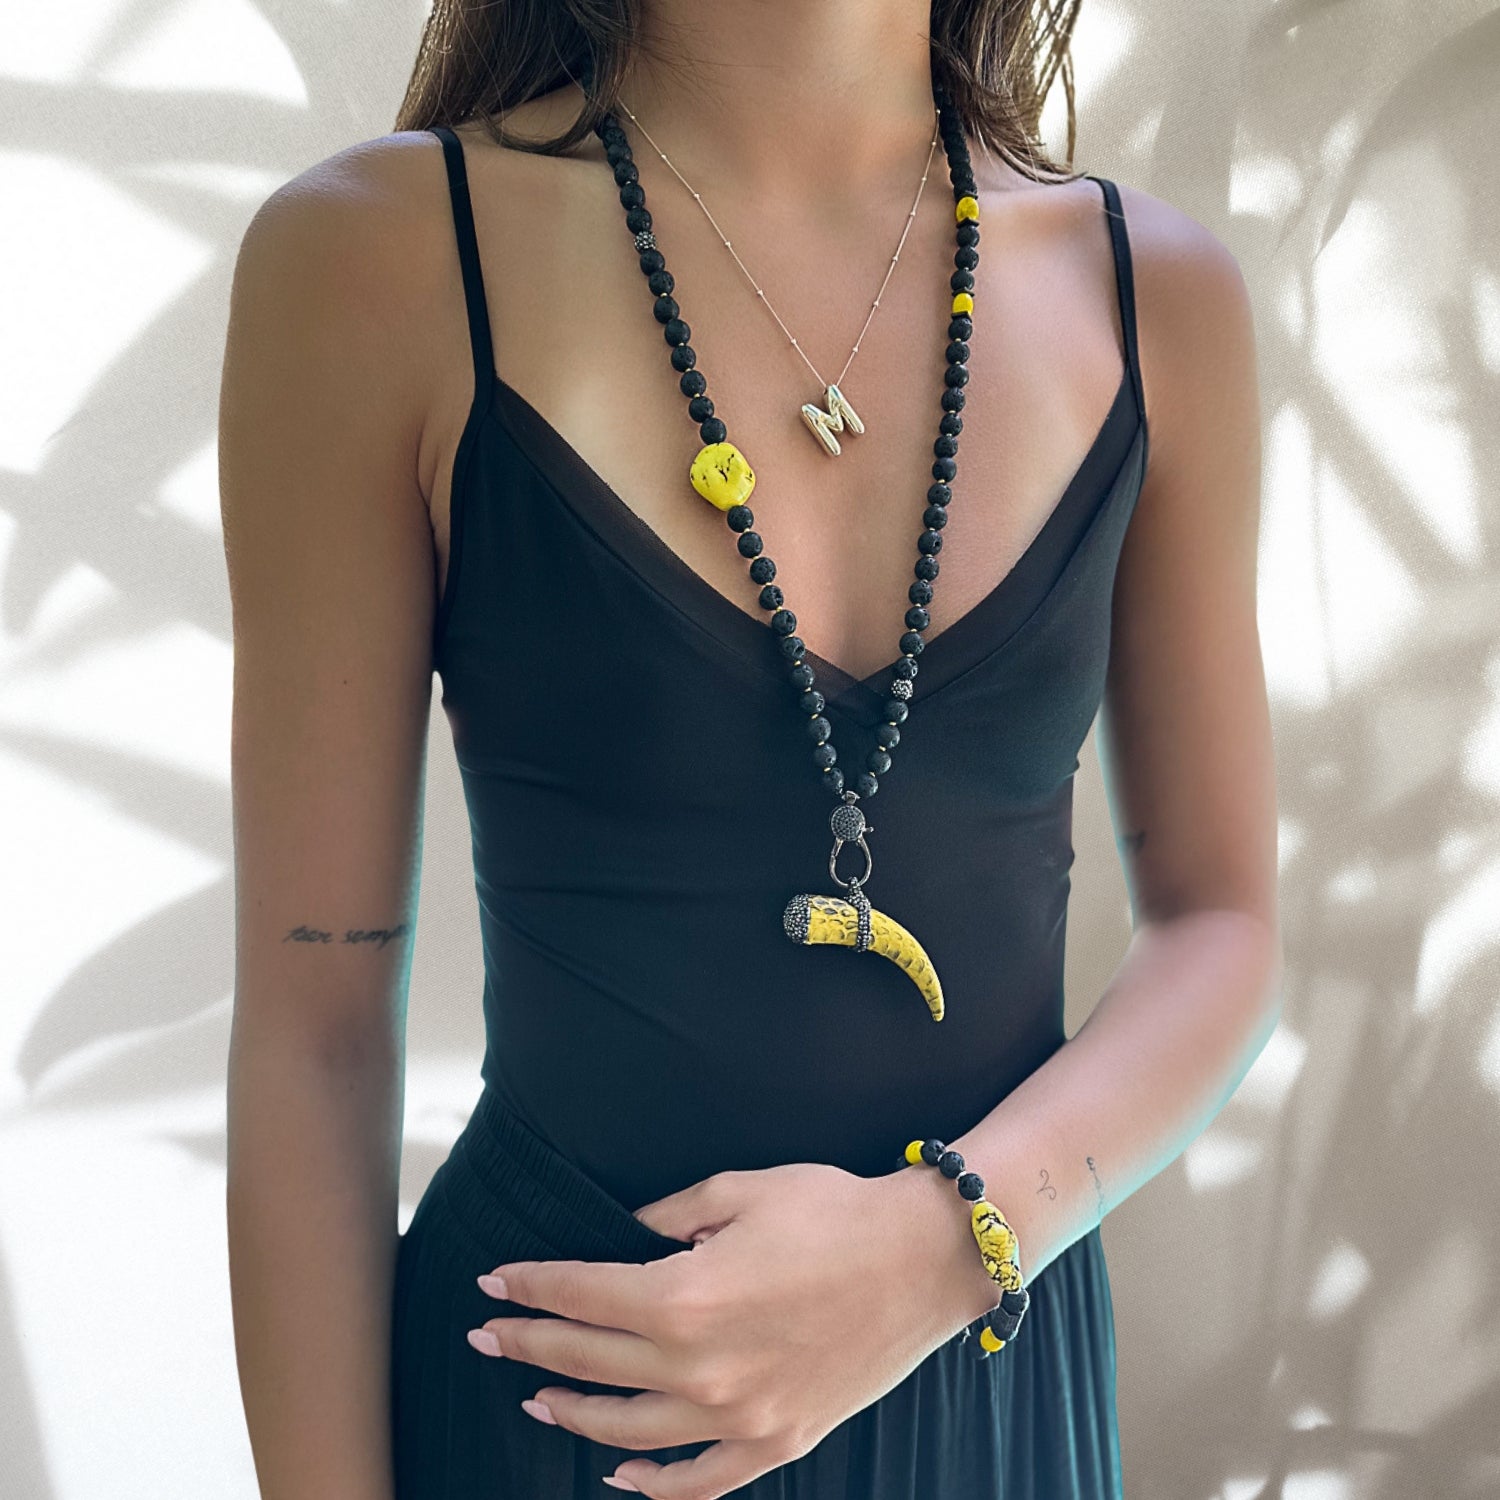 Model wearing the Spirit Cornicello Unique Necklace, exuding confidence and embracing the symbolic power of the pendant.